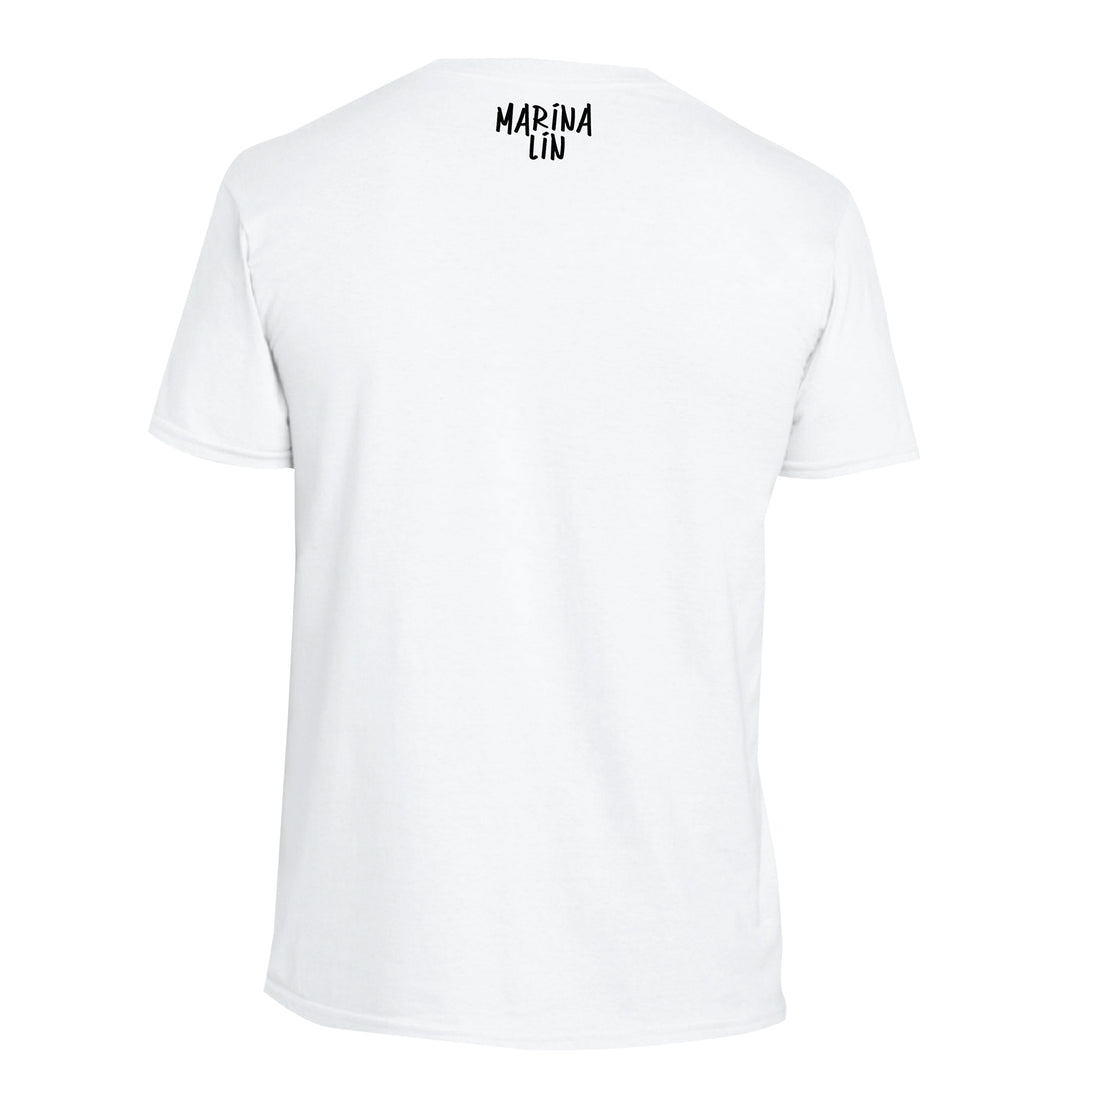 Marina Lin - Have Fun At Ur Party - White Unisex Tee